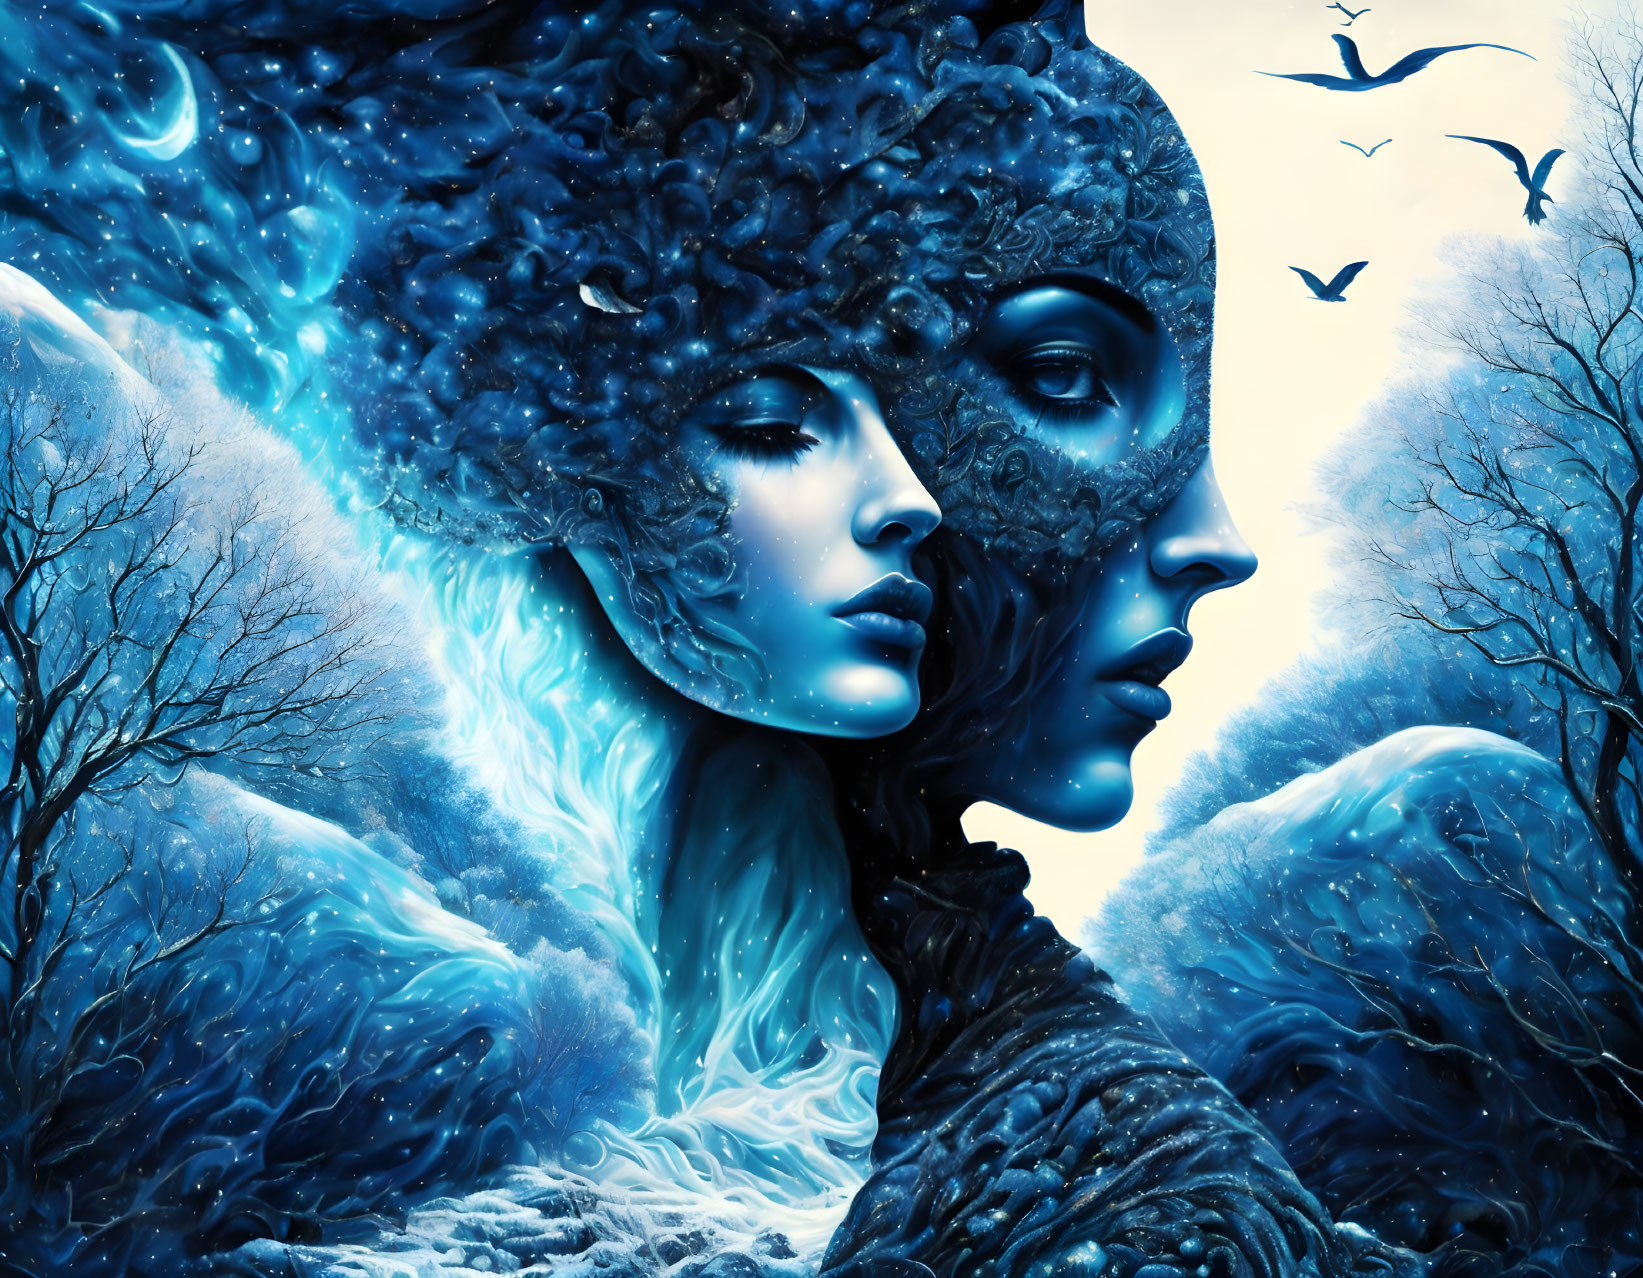 Digital fantasy art: Male and female faces merge in celestial icy landscape